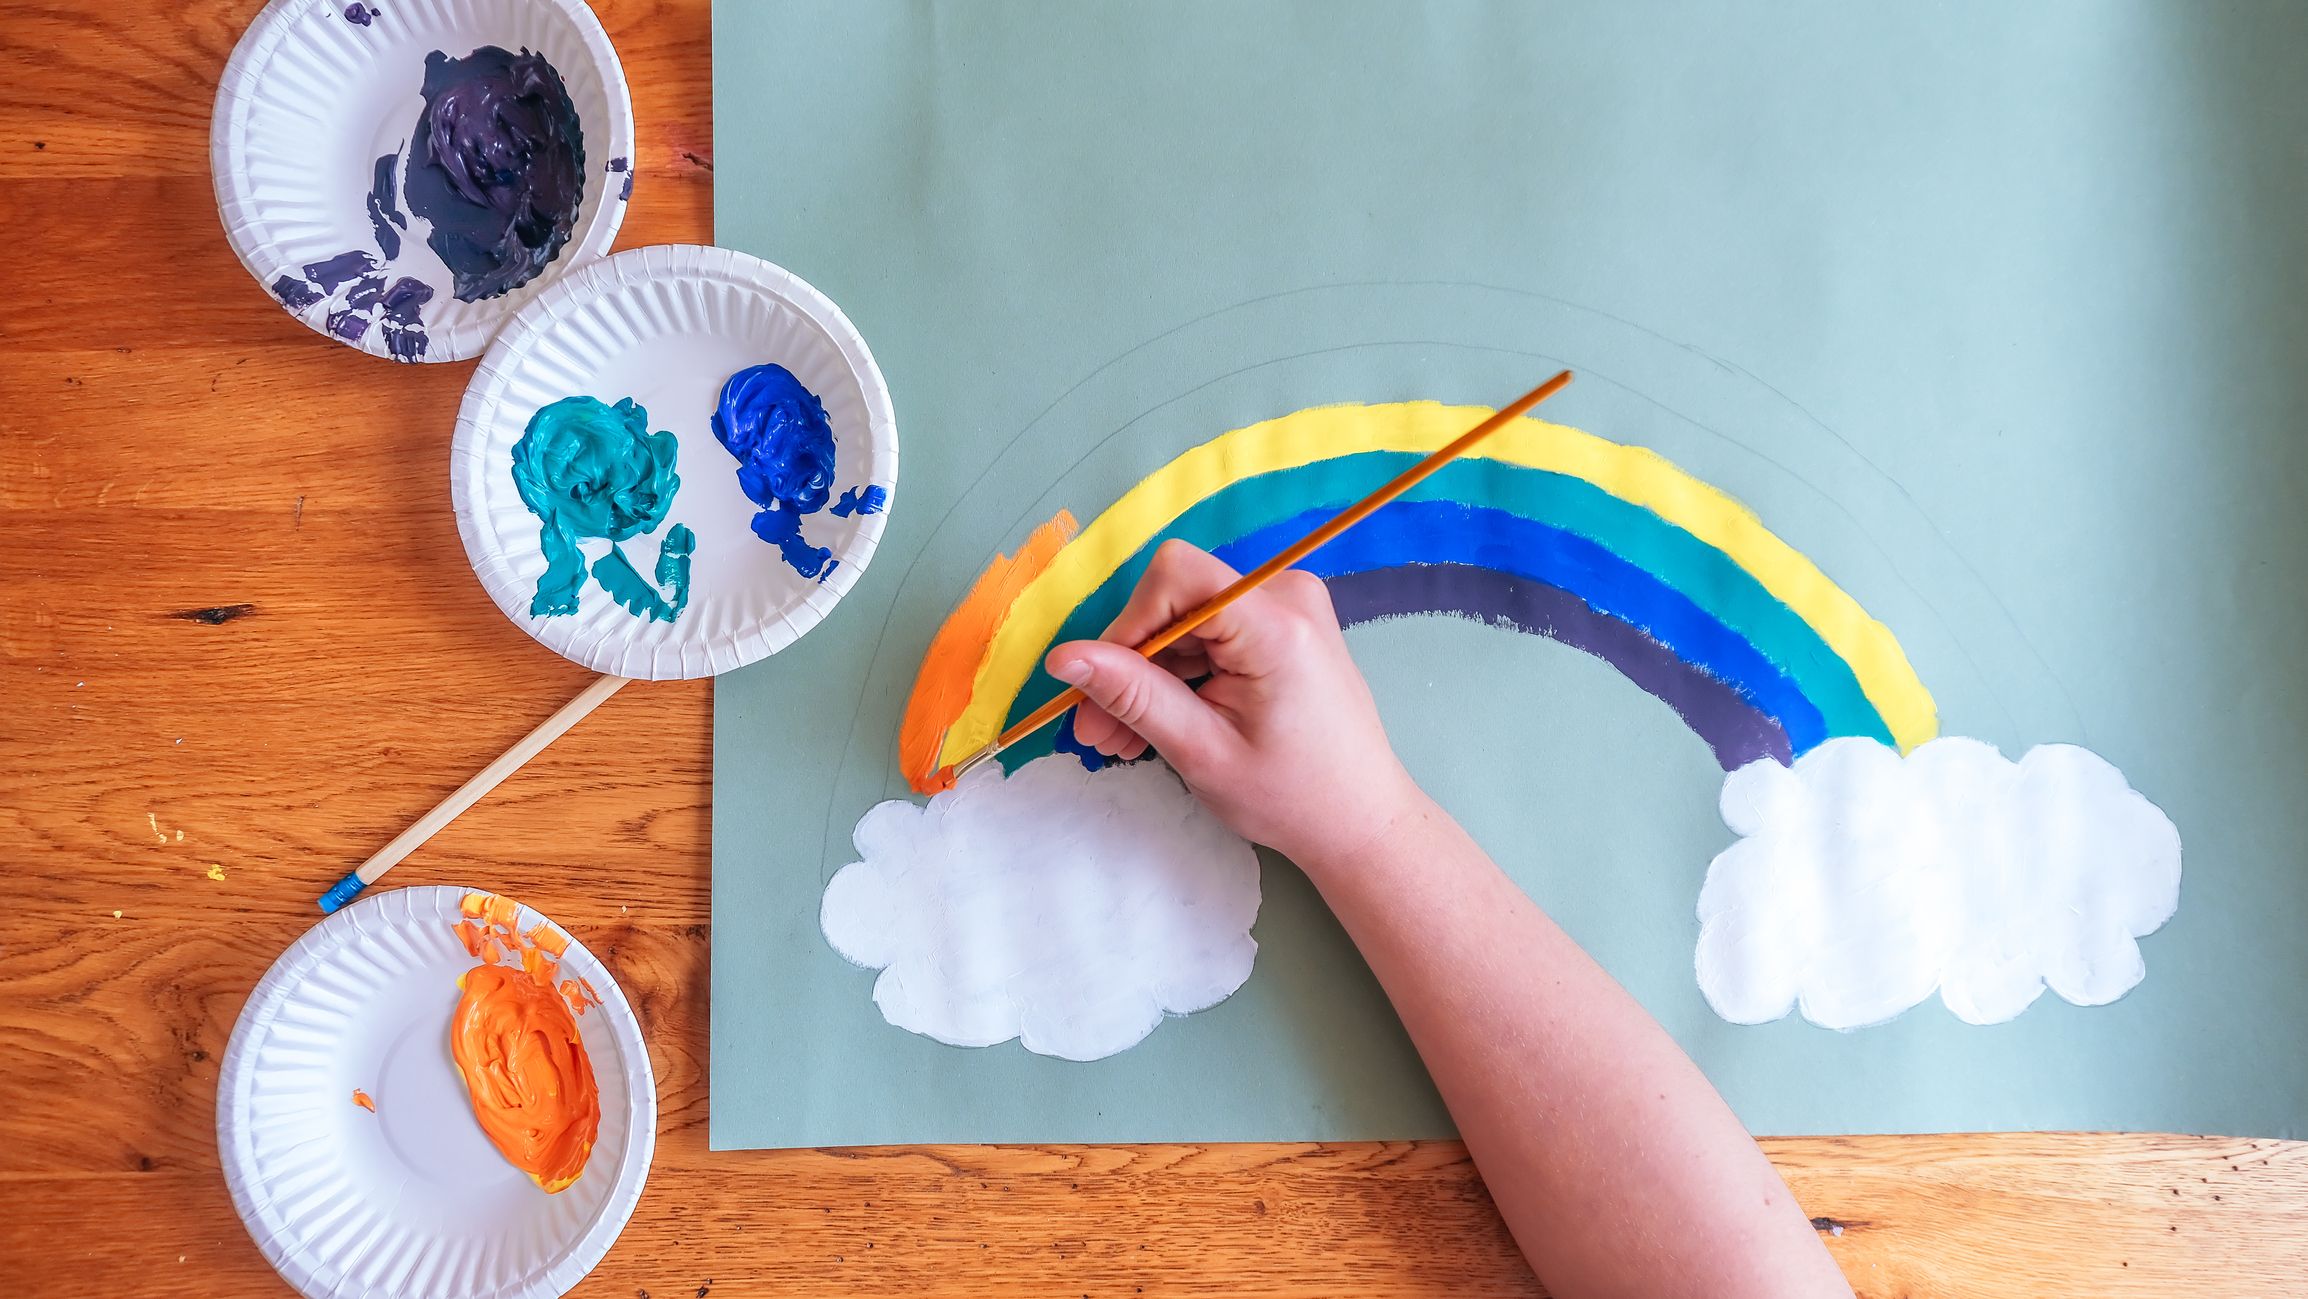 5 DIY Crafts for Kids to do During COVID-19 Lockdown